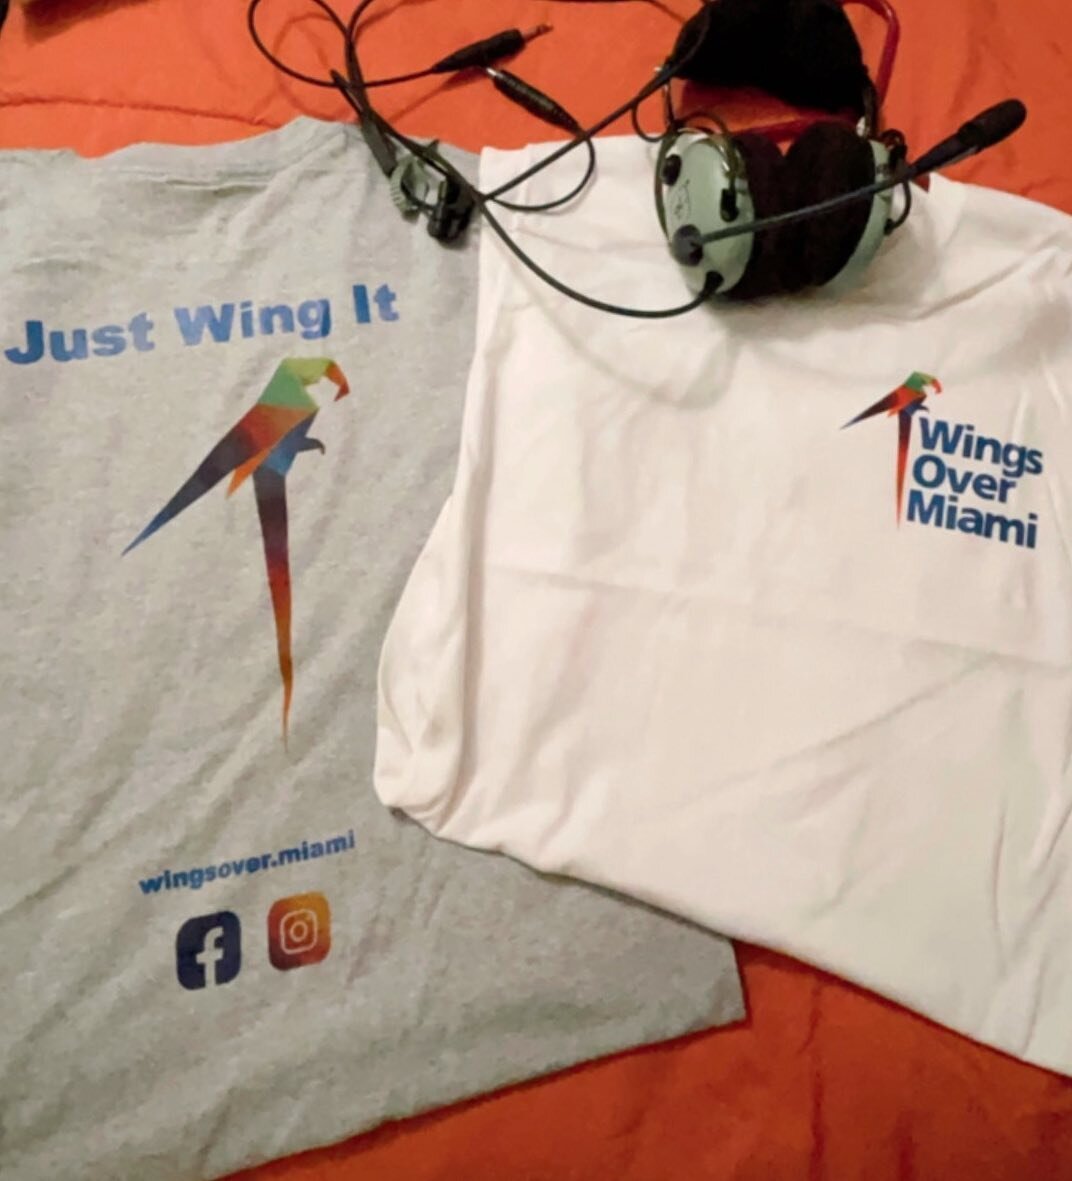 New merchandise !!! Get yours for your first tour flight over Miami!! 
.
.
#supportsmallbusiness #supportlocal #womanownedbusiness #miami